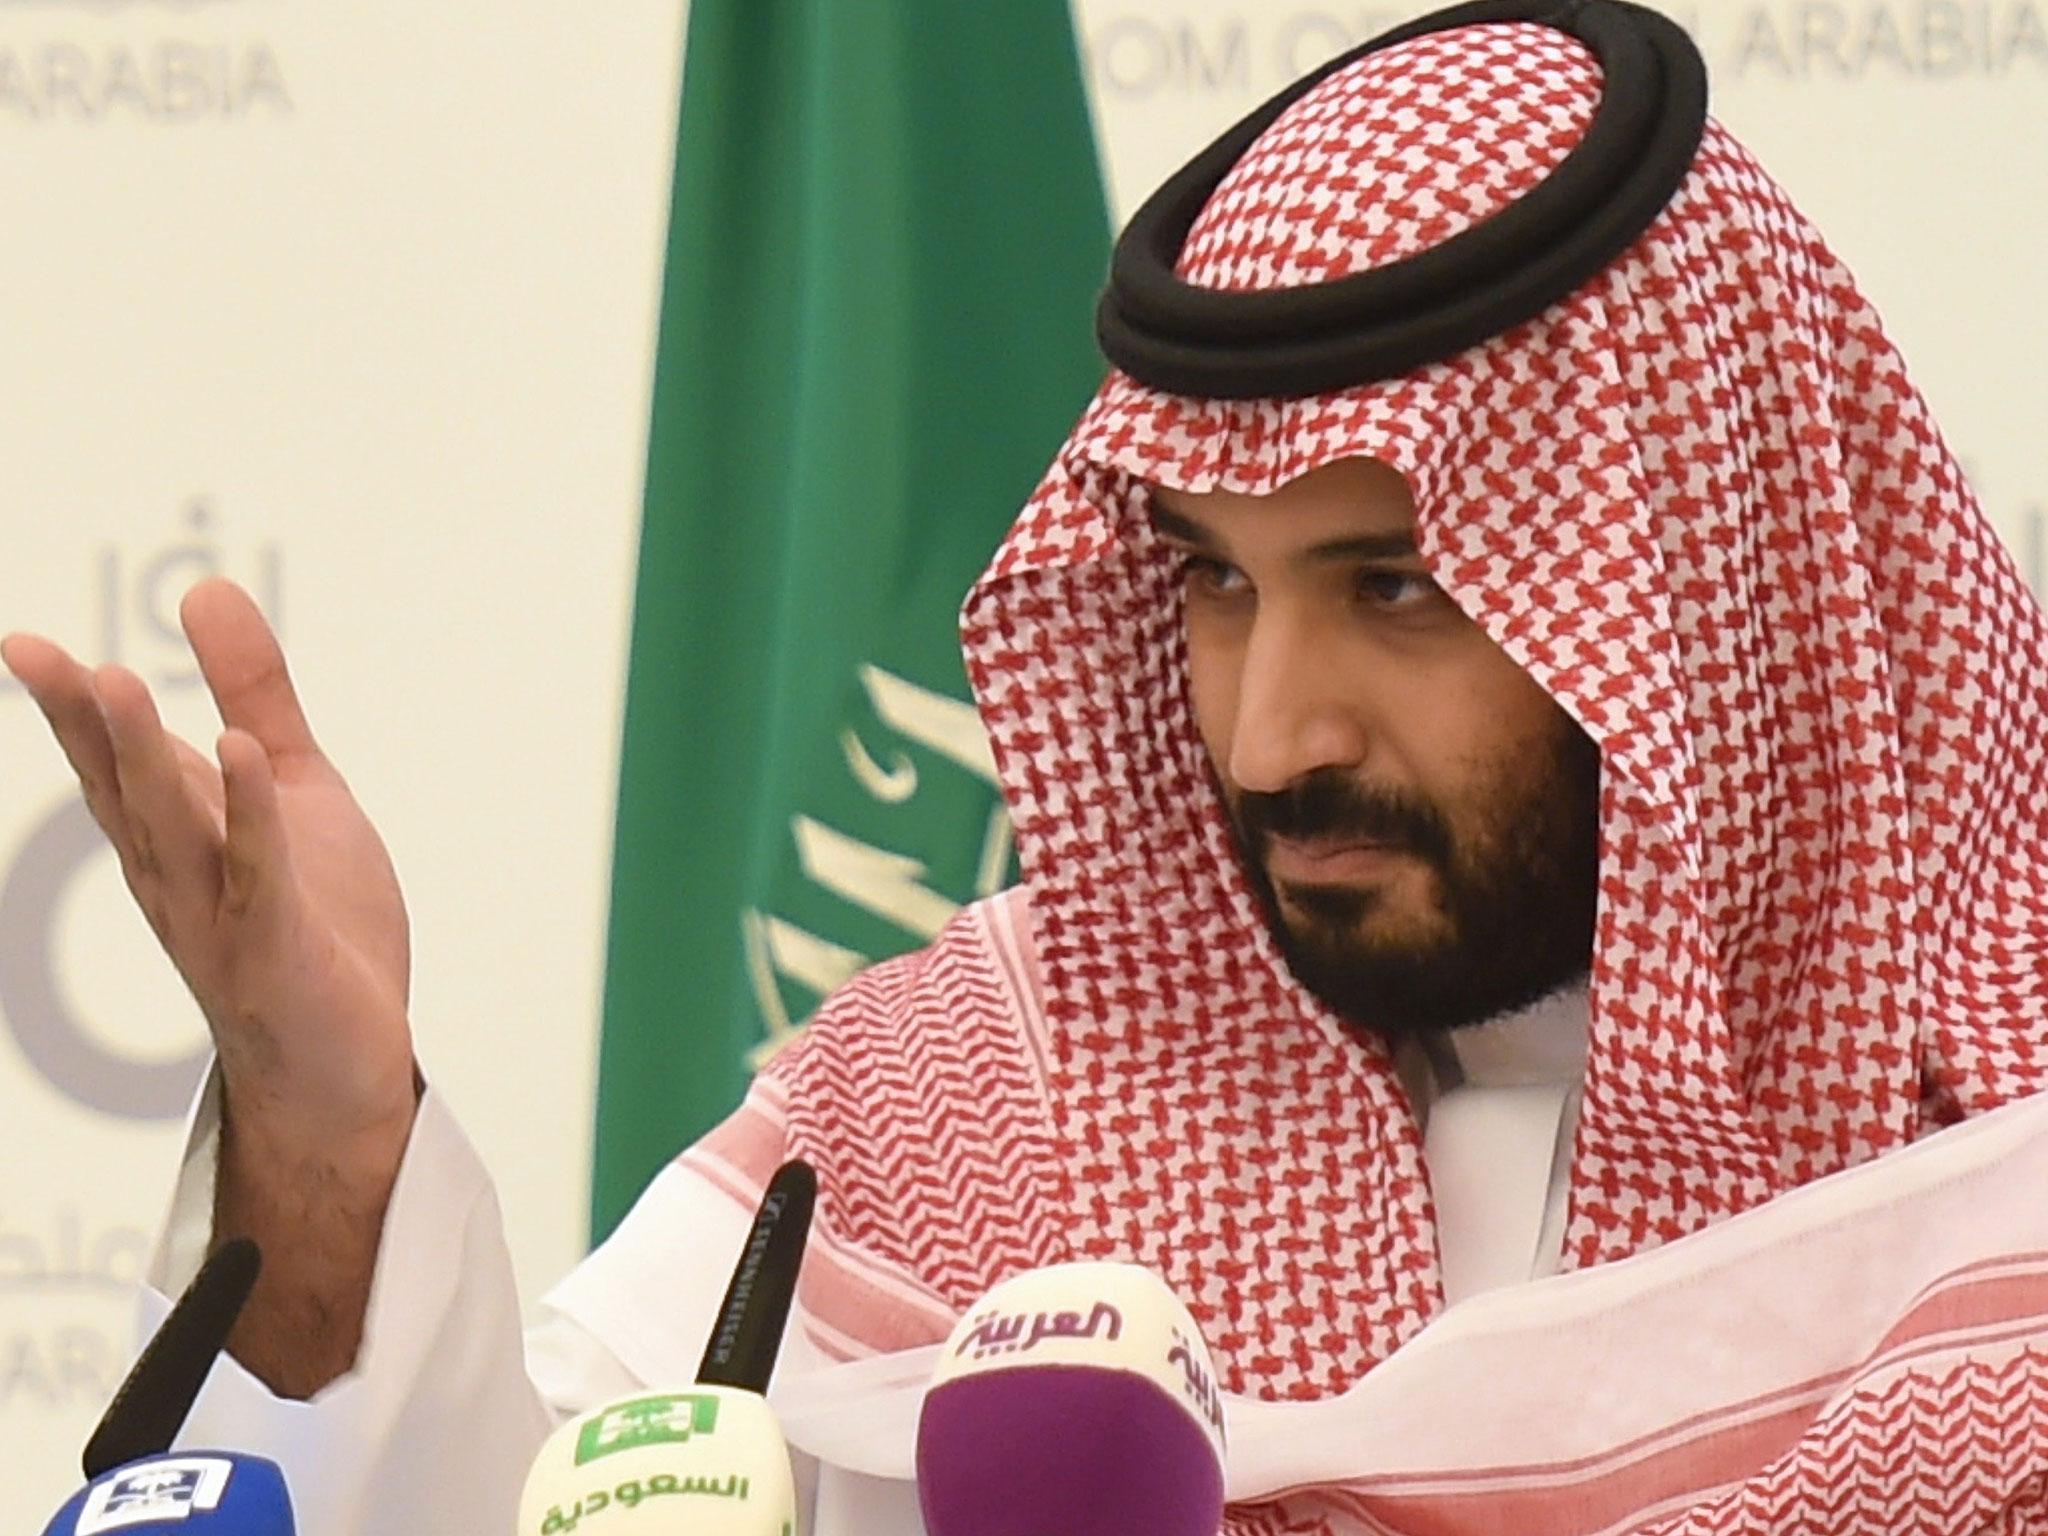 Mohammed bin Salman, Saudi Arabia's Crown Prince, previously said he had 'reserves' of 'ten million jobs that are being occupied by non-Saudi employees' that he could 'resort to at any time of my choosing'